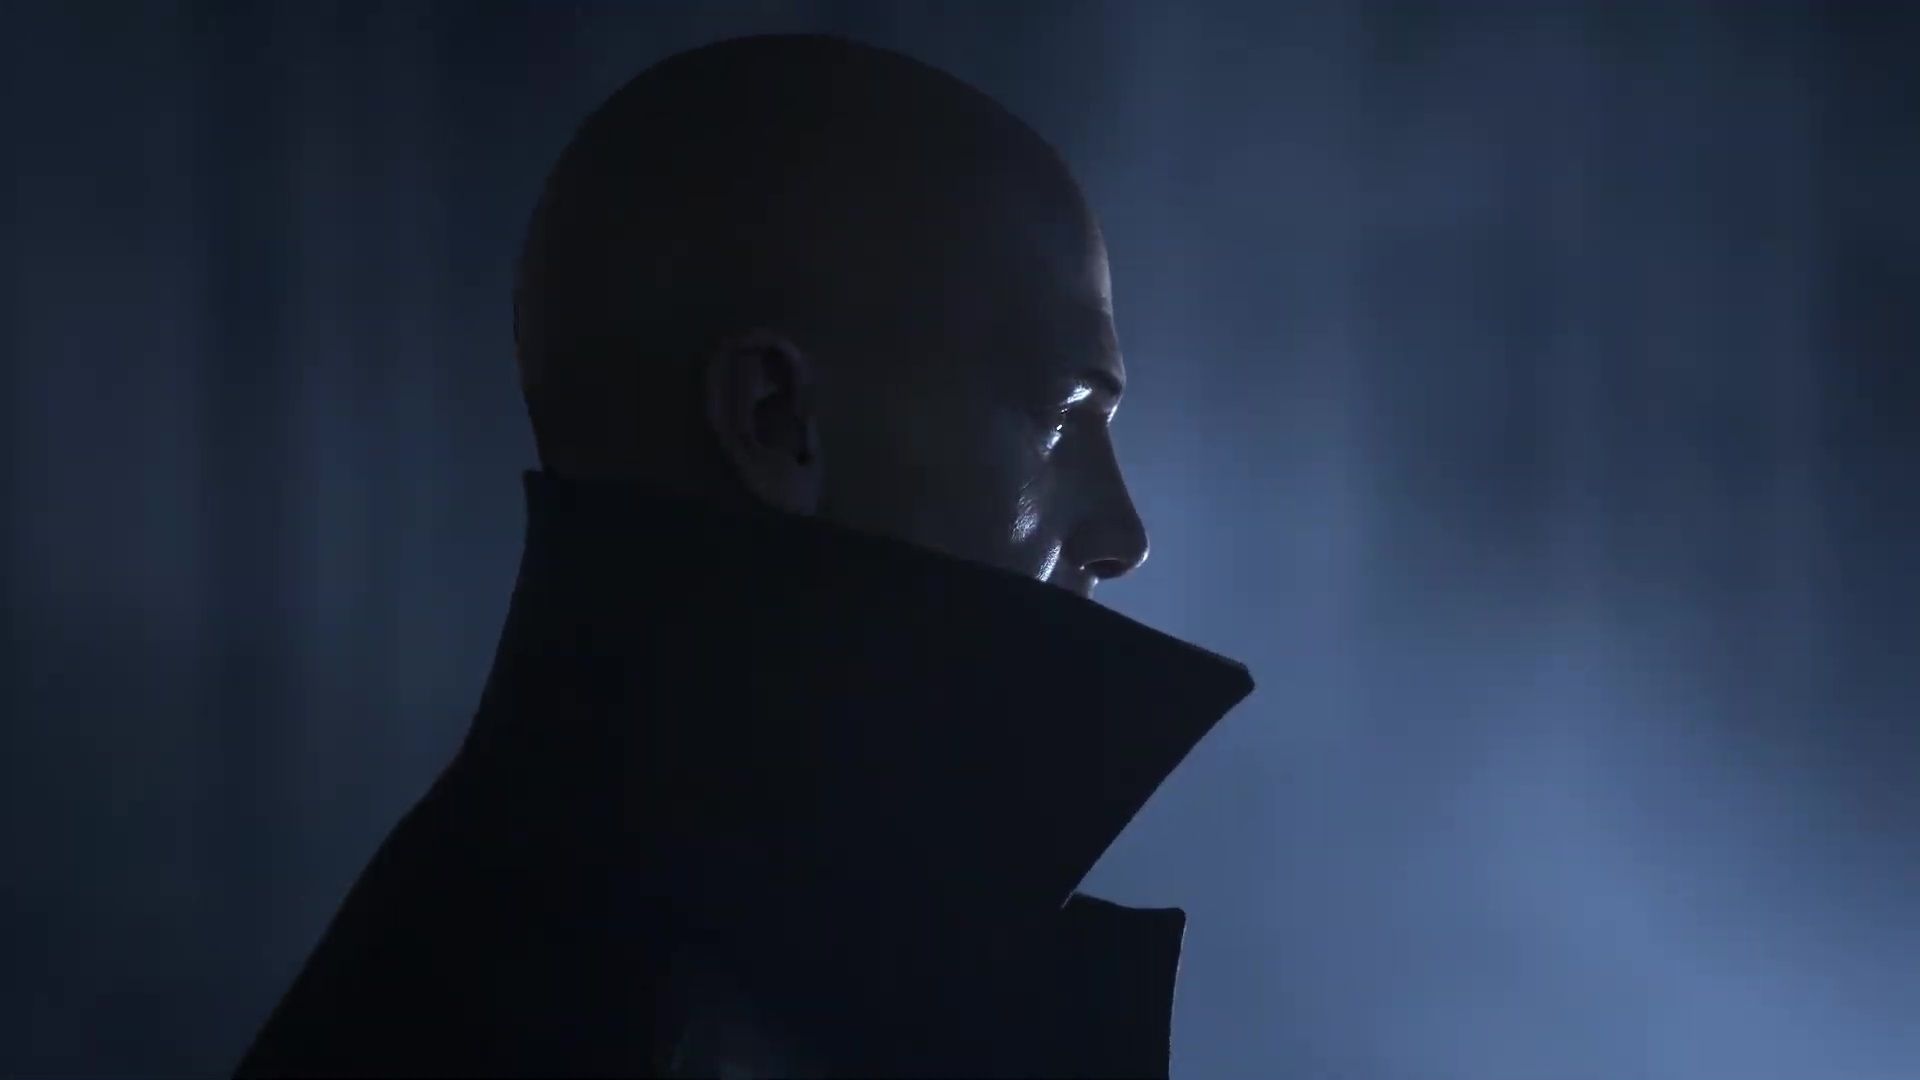 Hitman 3' is coming to PS4 and PS5 in January 2021